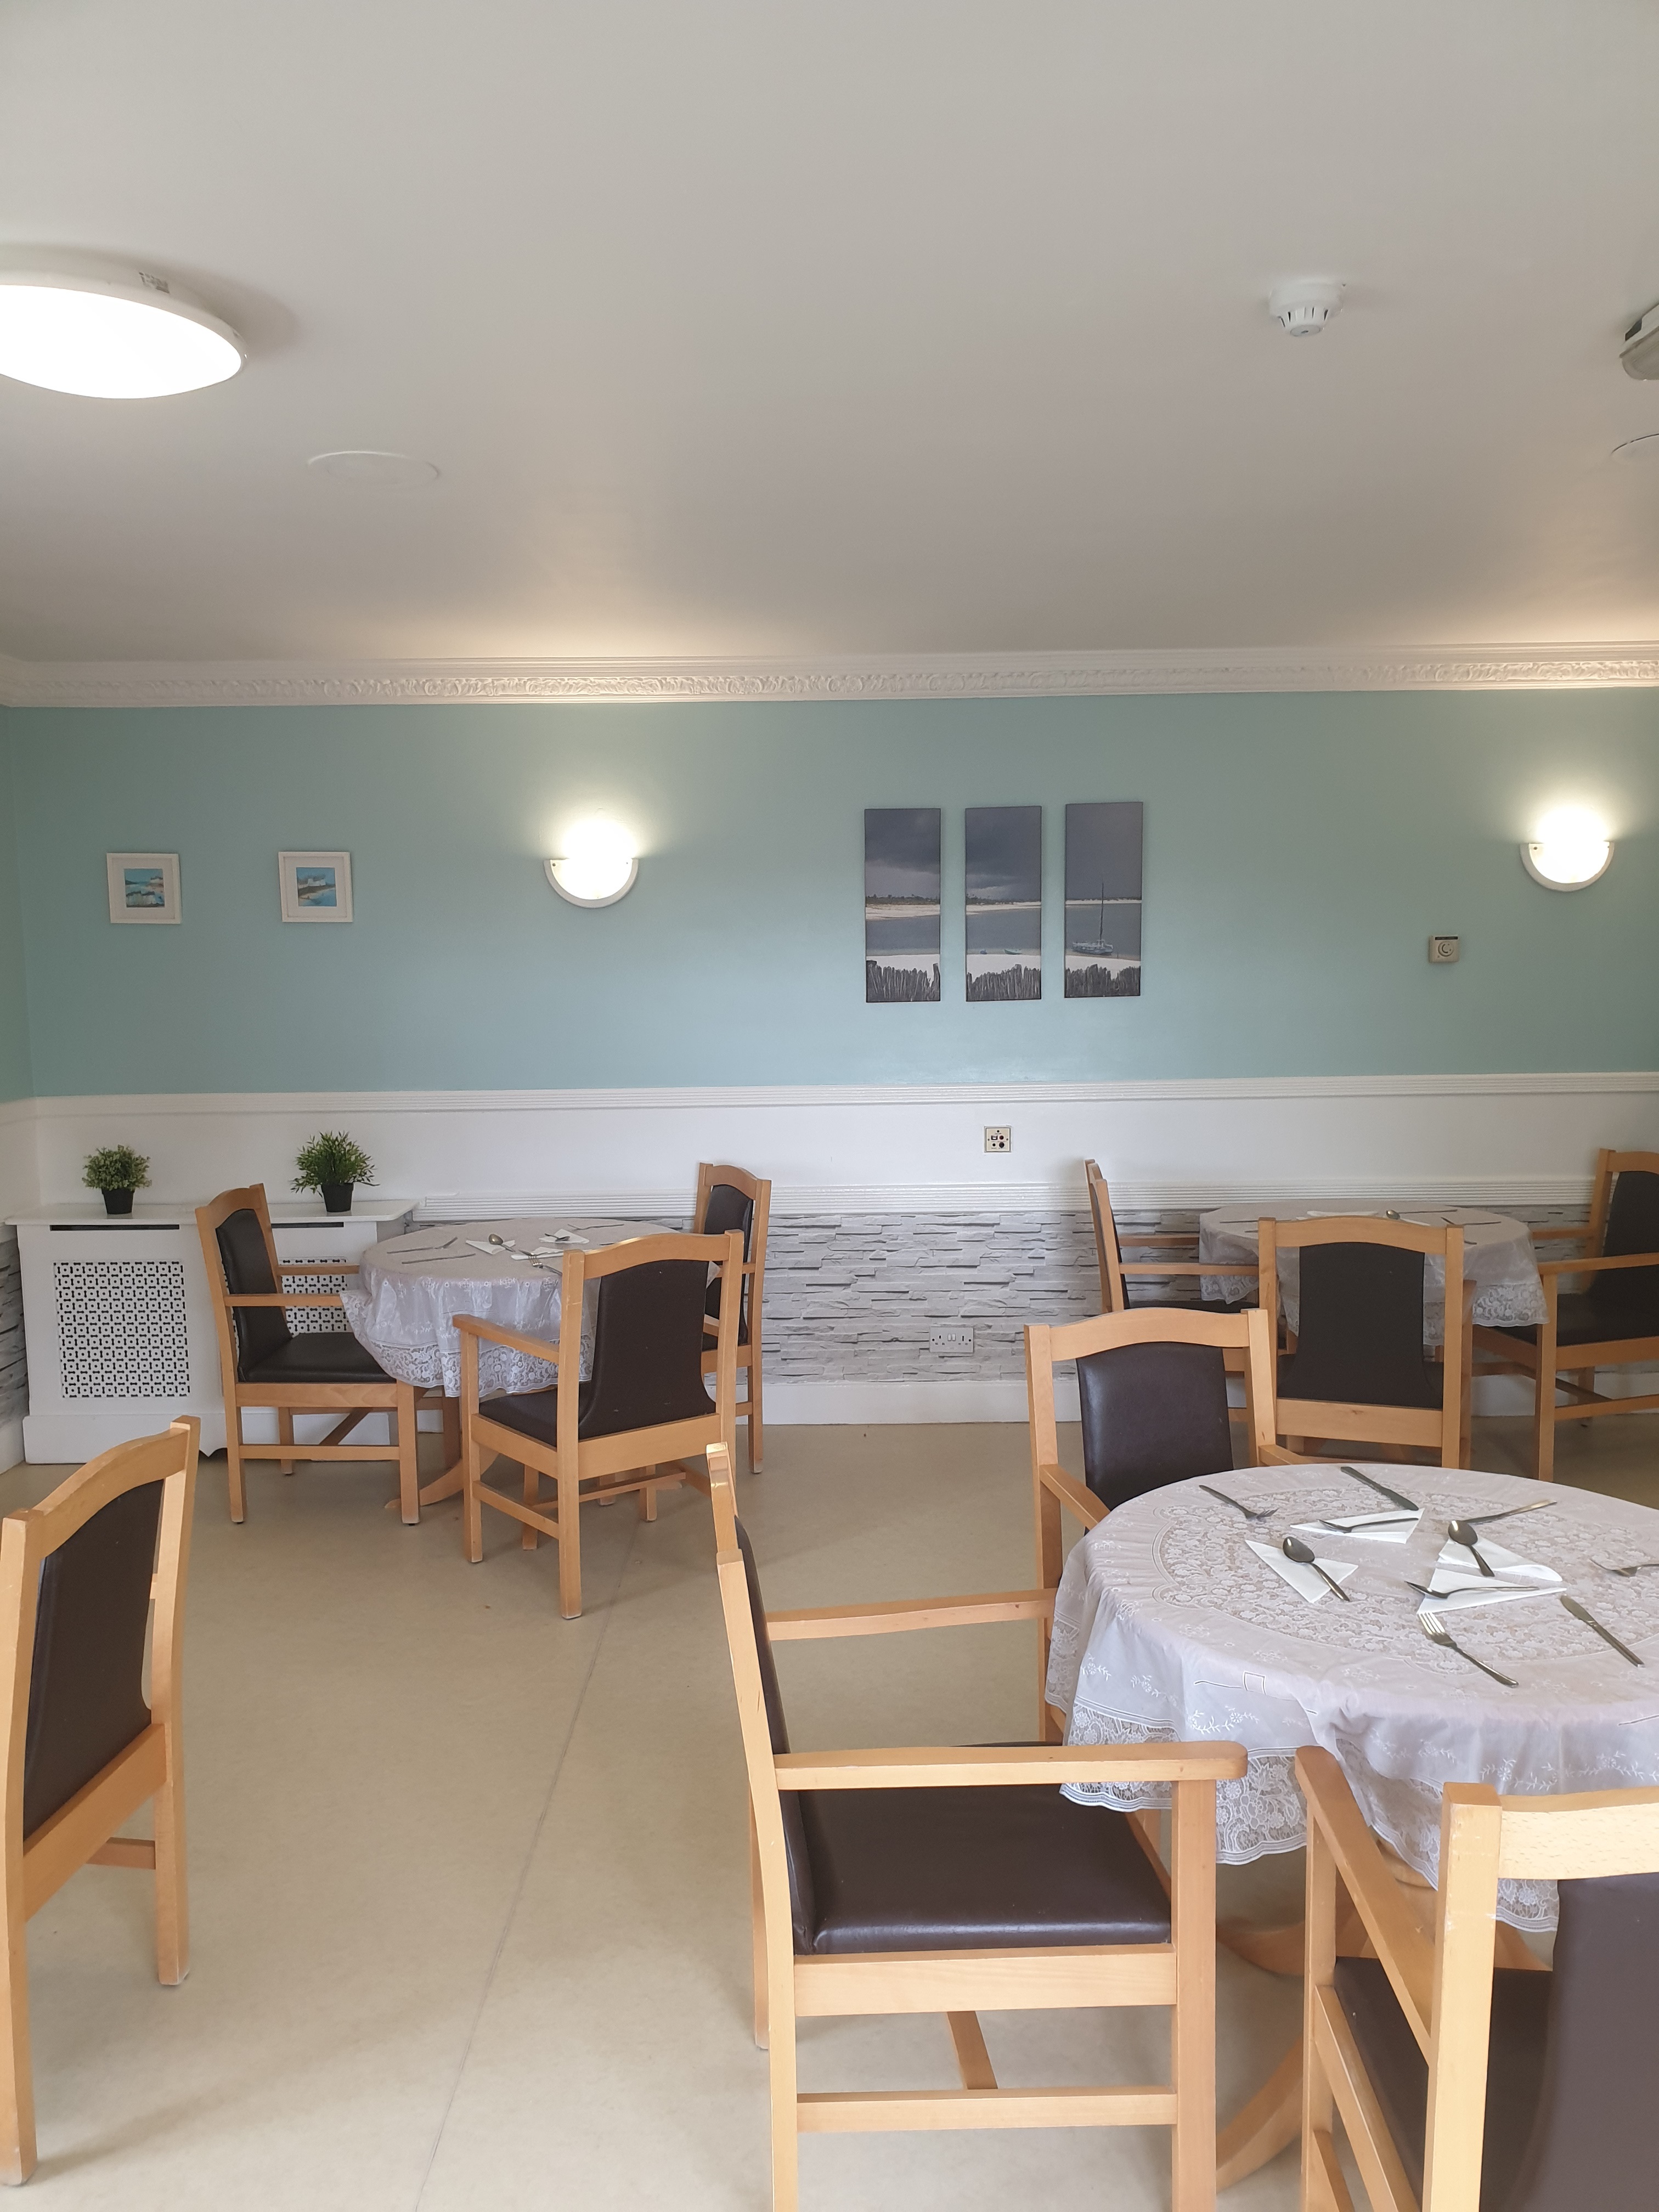 Dining Room May 19: Key Healthcare is dedicated to caring for elderly residents in safe. We have multiple dementia care homes including our care home middlesbrough, our care home St. Helen and care home saltburn. We excel in monitoring and improving care levels.